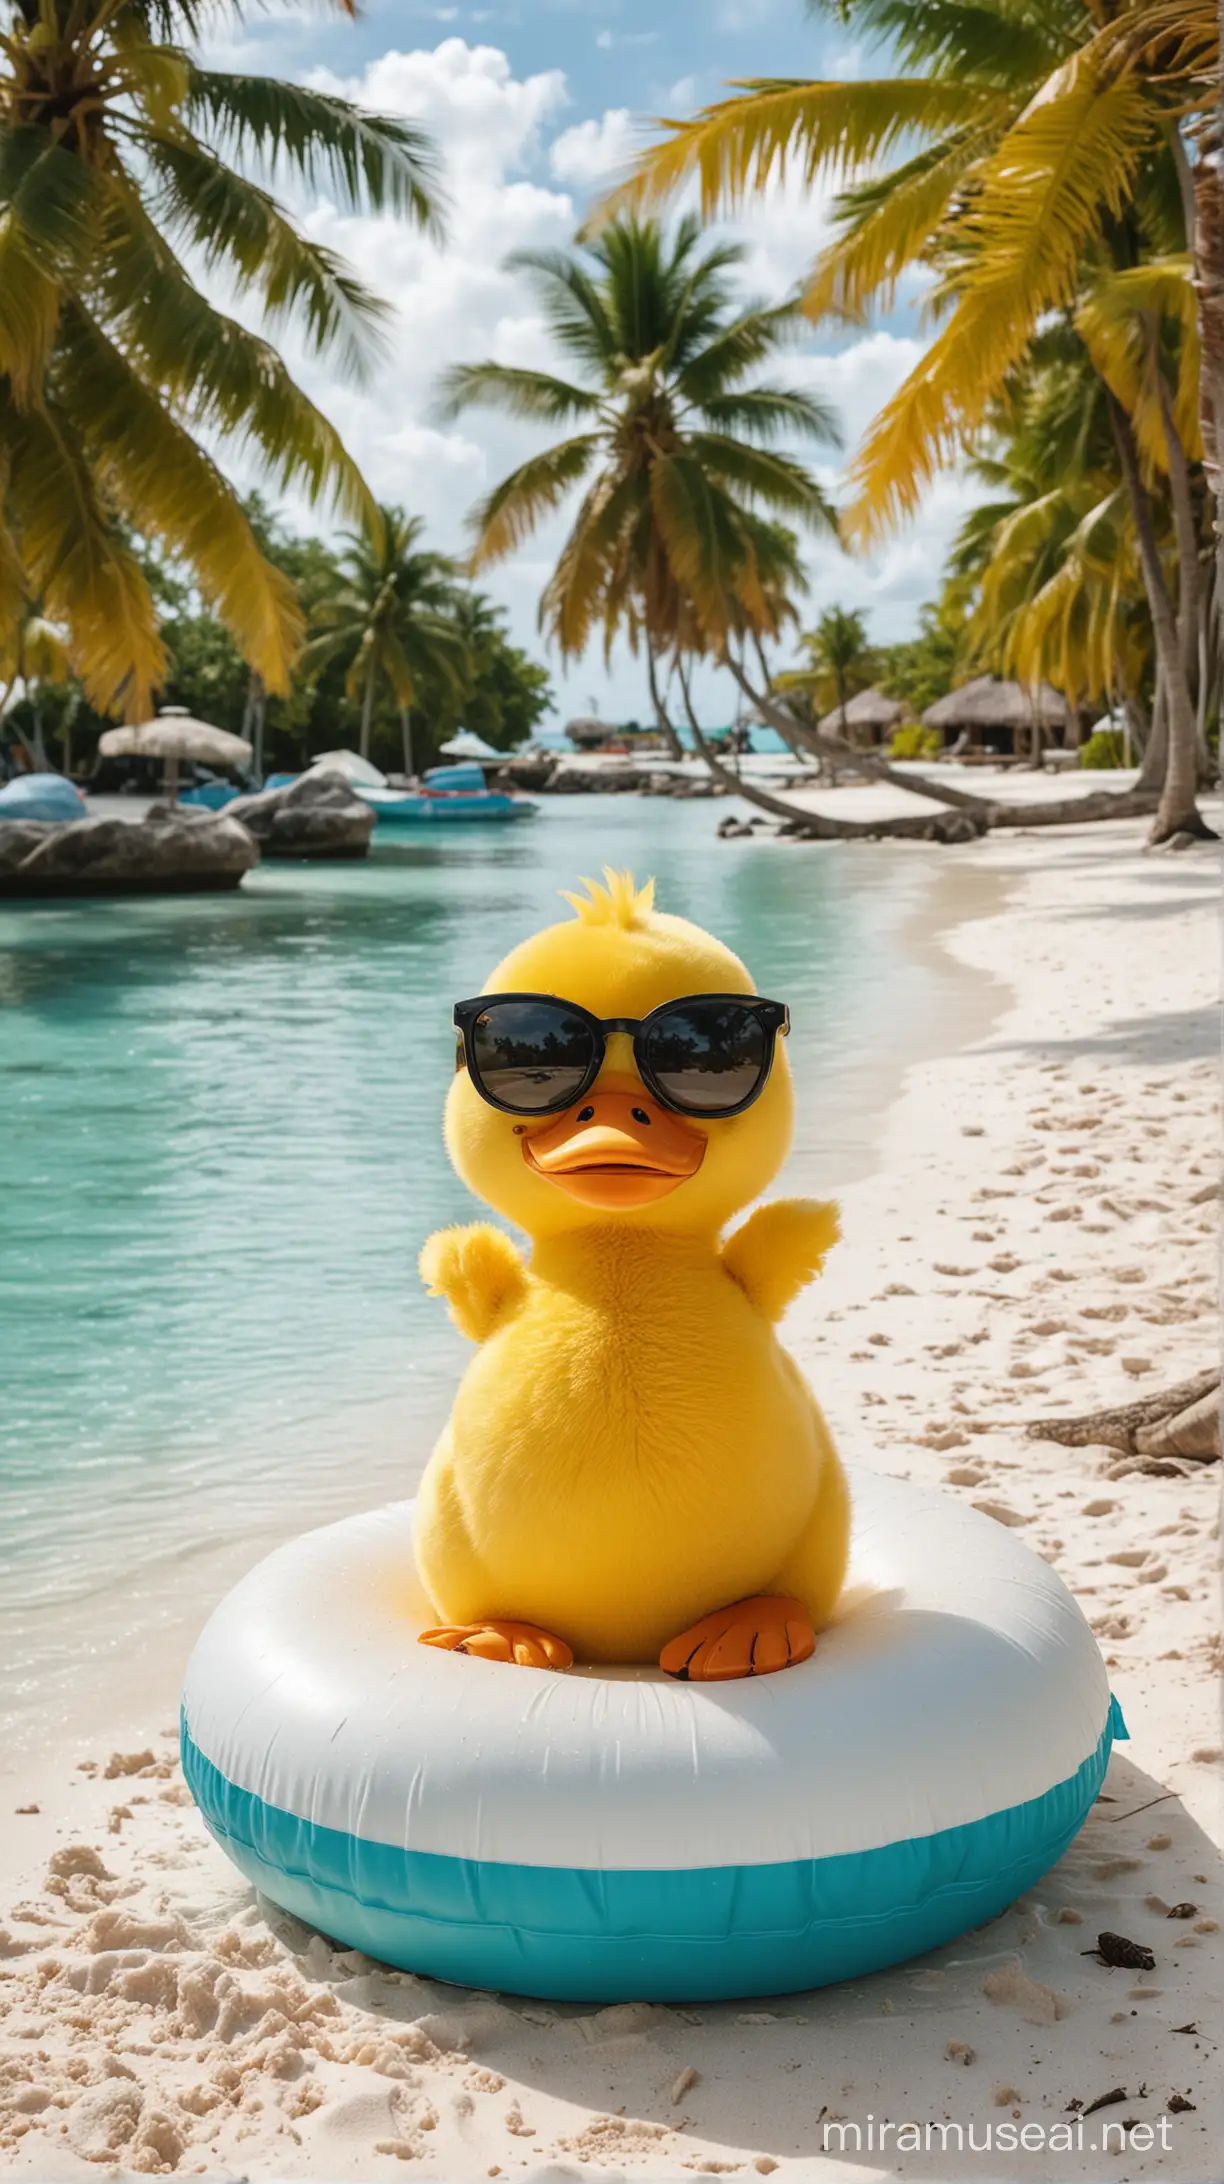 Kitten Relaxing by Turquoise Lagoon with Yellow Duck Inflatable